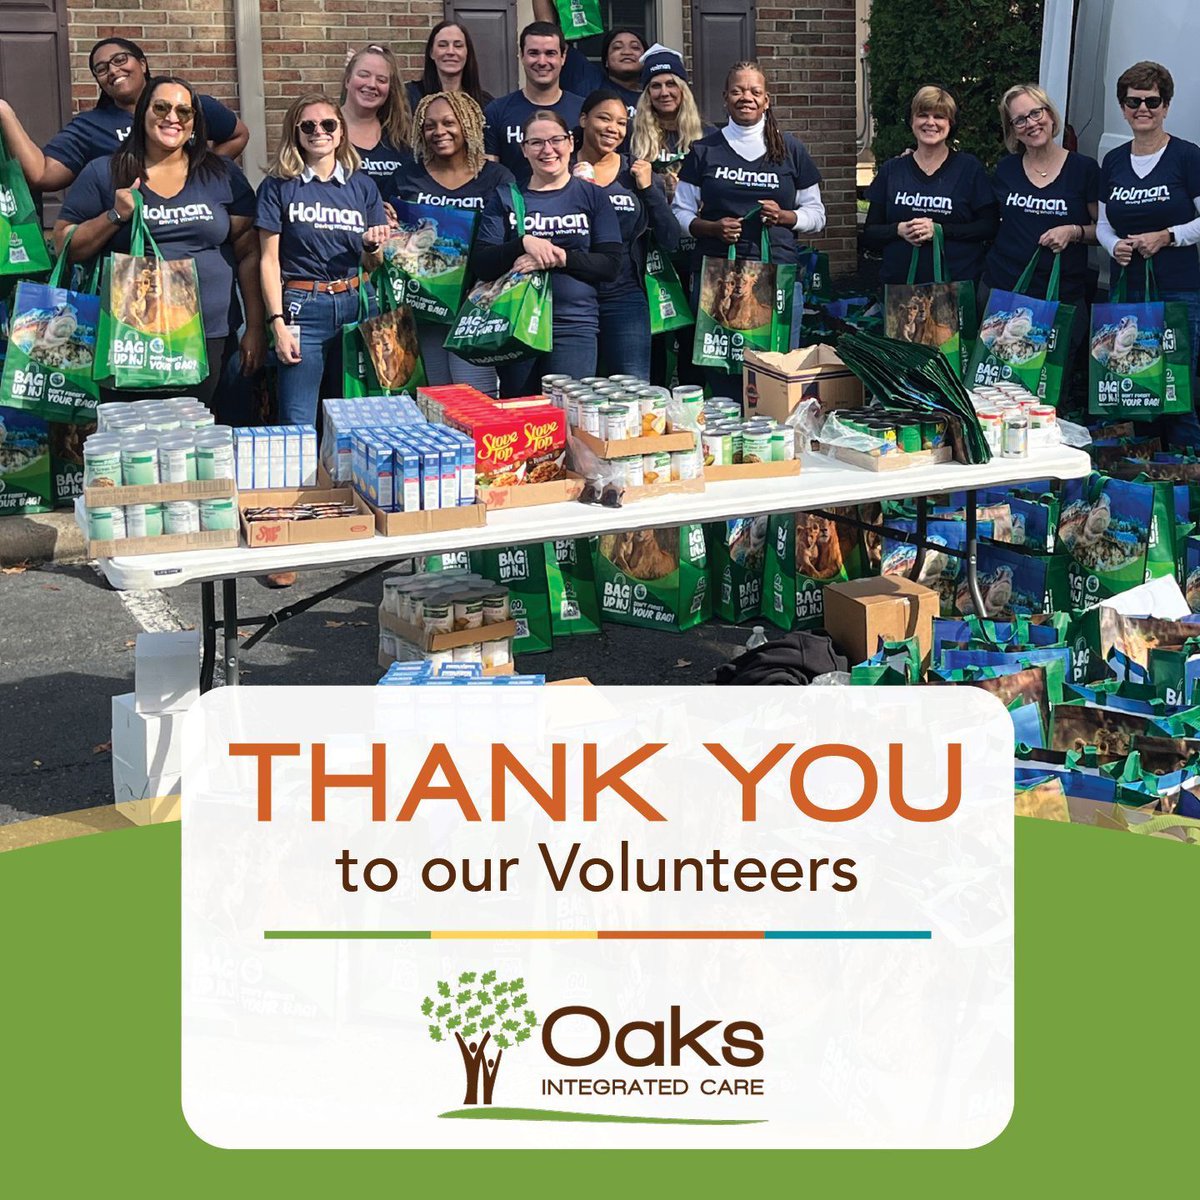 In honor of 💚 National #VolunteerAppreciationWeek, we want to send a huge THANK YOU to all of our volunteers.

This week we’re shining a spotlight on a few of our incredible volunteers, starting with @Holman_hq. Here’s to celebrating you! 👏